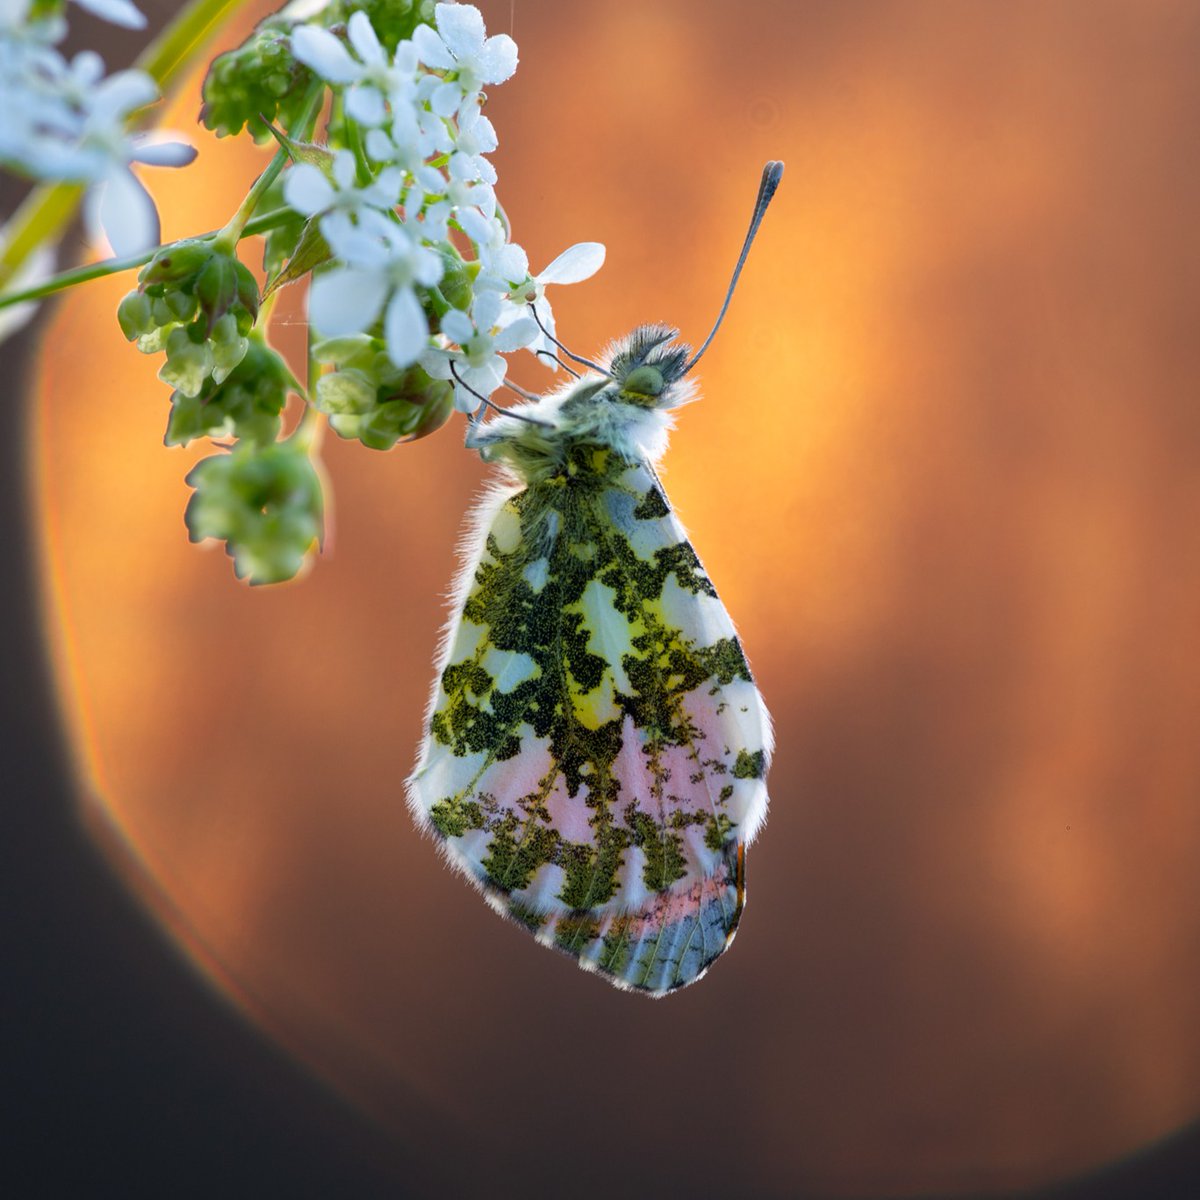 Remember the clocks 'spring forward' an hour at 1am this coming Sunday (31 March) 🦋 ☀️ What will you do with an extra hour of daylight this Sunday? 📷 : Orange-tip (Jaco Costerus)